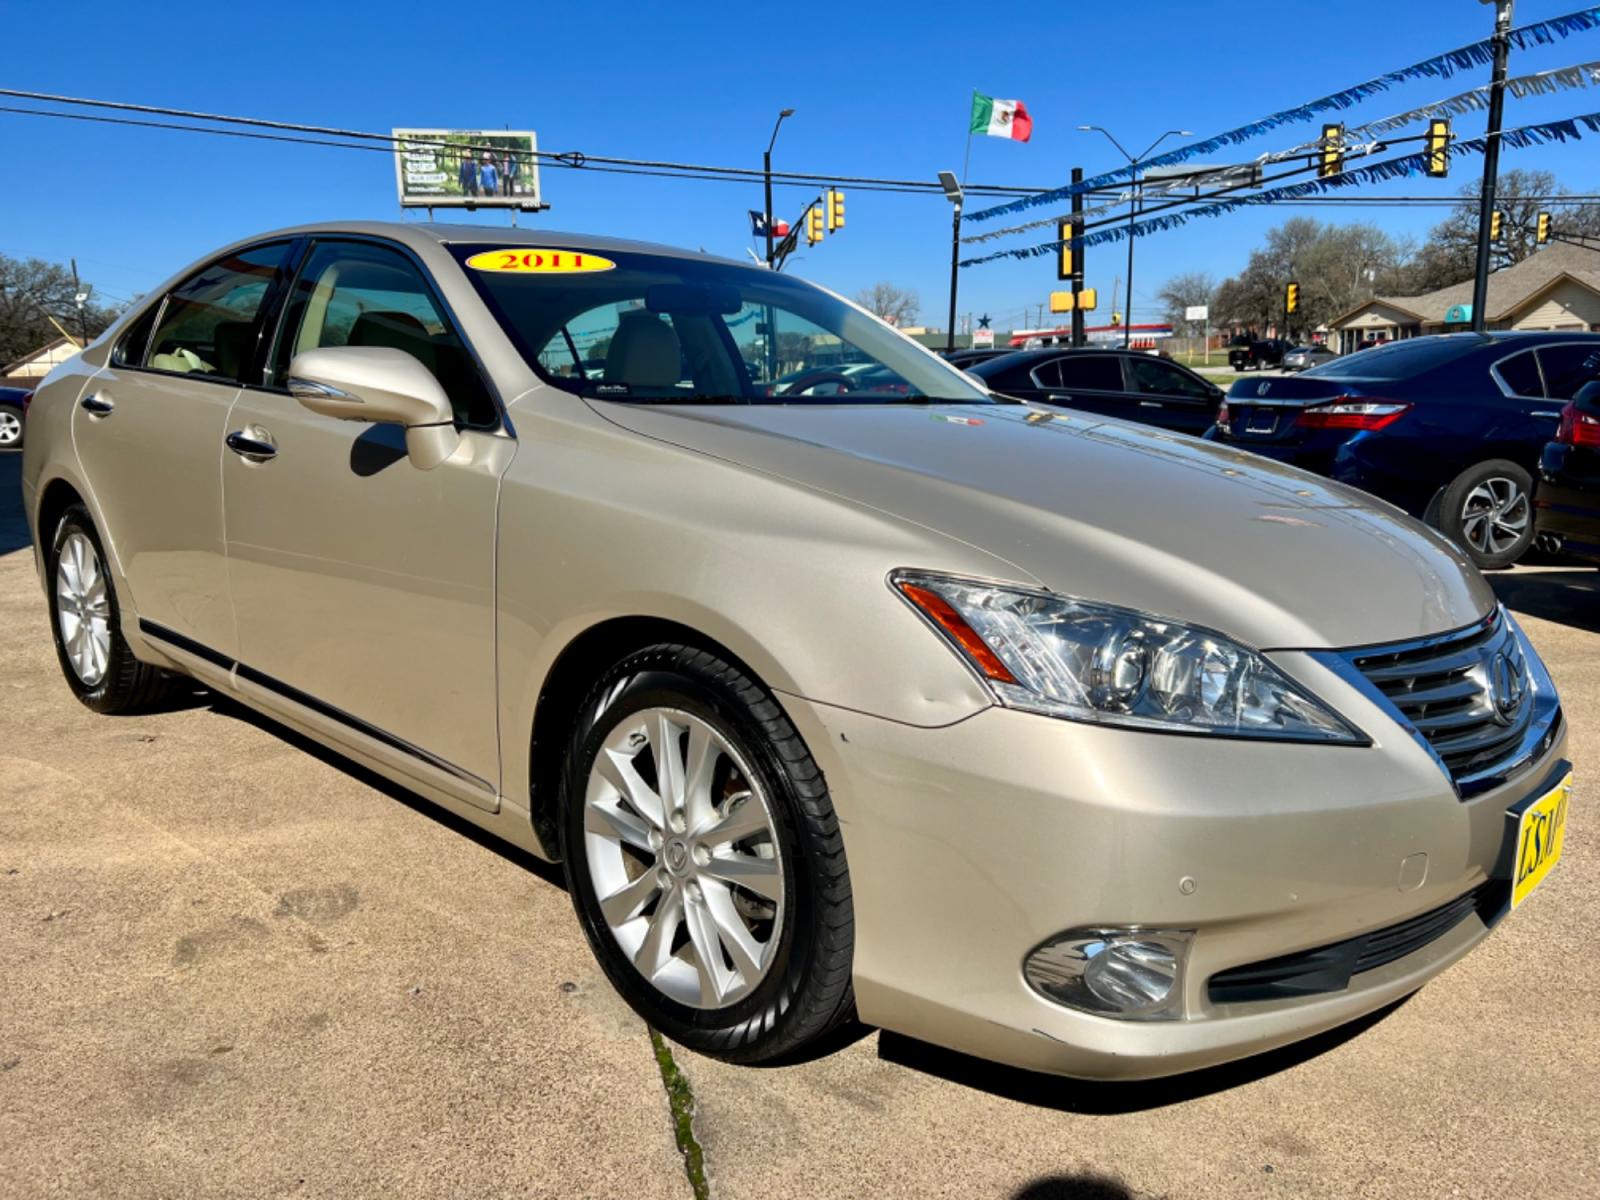 2011 GOLD LEXUS ES 350 (JTHBK1EG9B2) , located at 5900 E. Lancaster Ave., Fort Worth, TX, 76112, (817) 457-5456, 0.000000, 0.000000 - This is a 1 OWNER, 2011 LEXUS ES 350 4 DOOR SEDAN that is in excellent condition. There are no dents or scratches. The interior is clean with no rips or tears or stains. All power windows, door locks and seats. Ice cold AC for those hot Texas summer days. It is equipped with a CD player, AM/FM radio - Photo #7